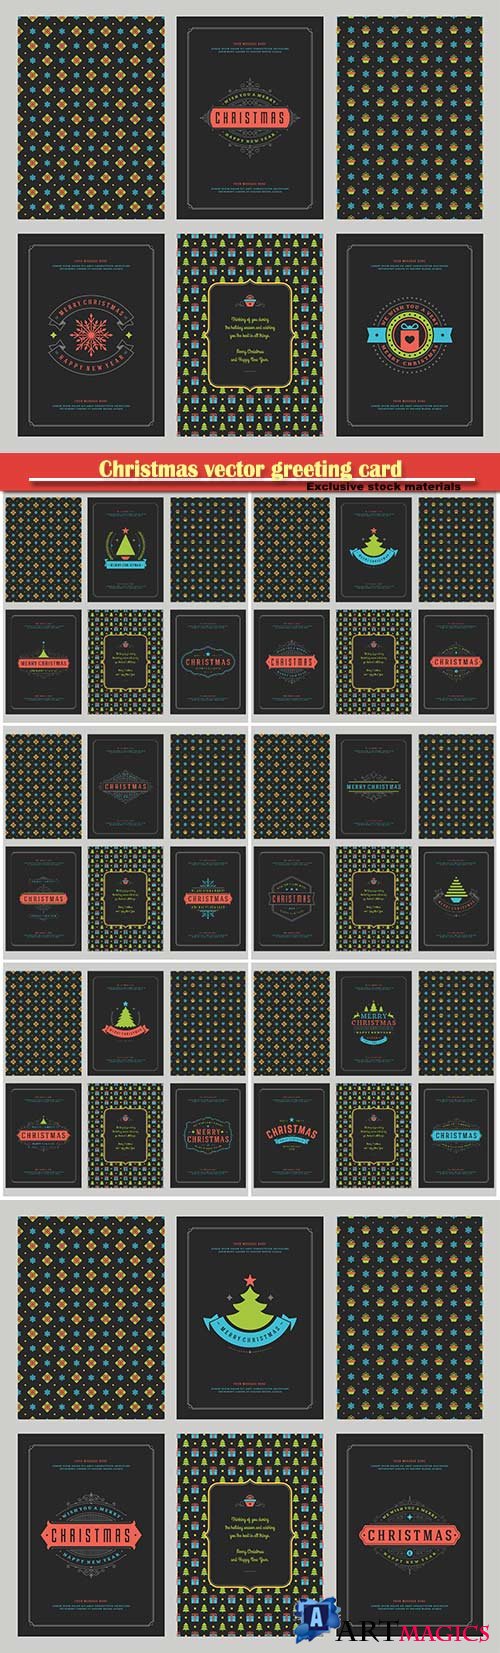 Christmas vector greeting card,  New Year vintage texture